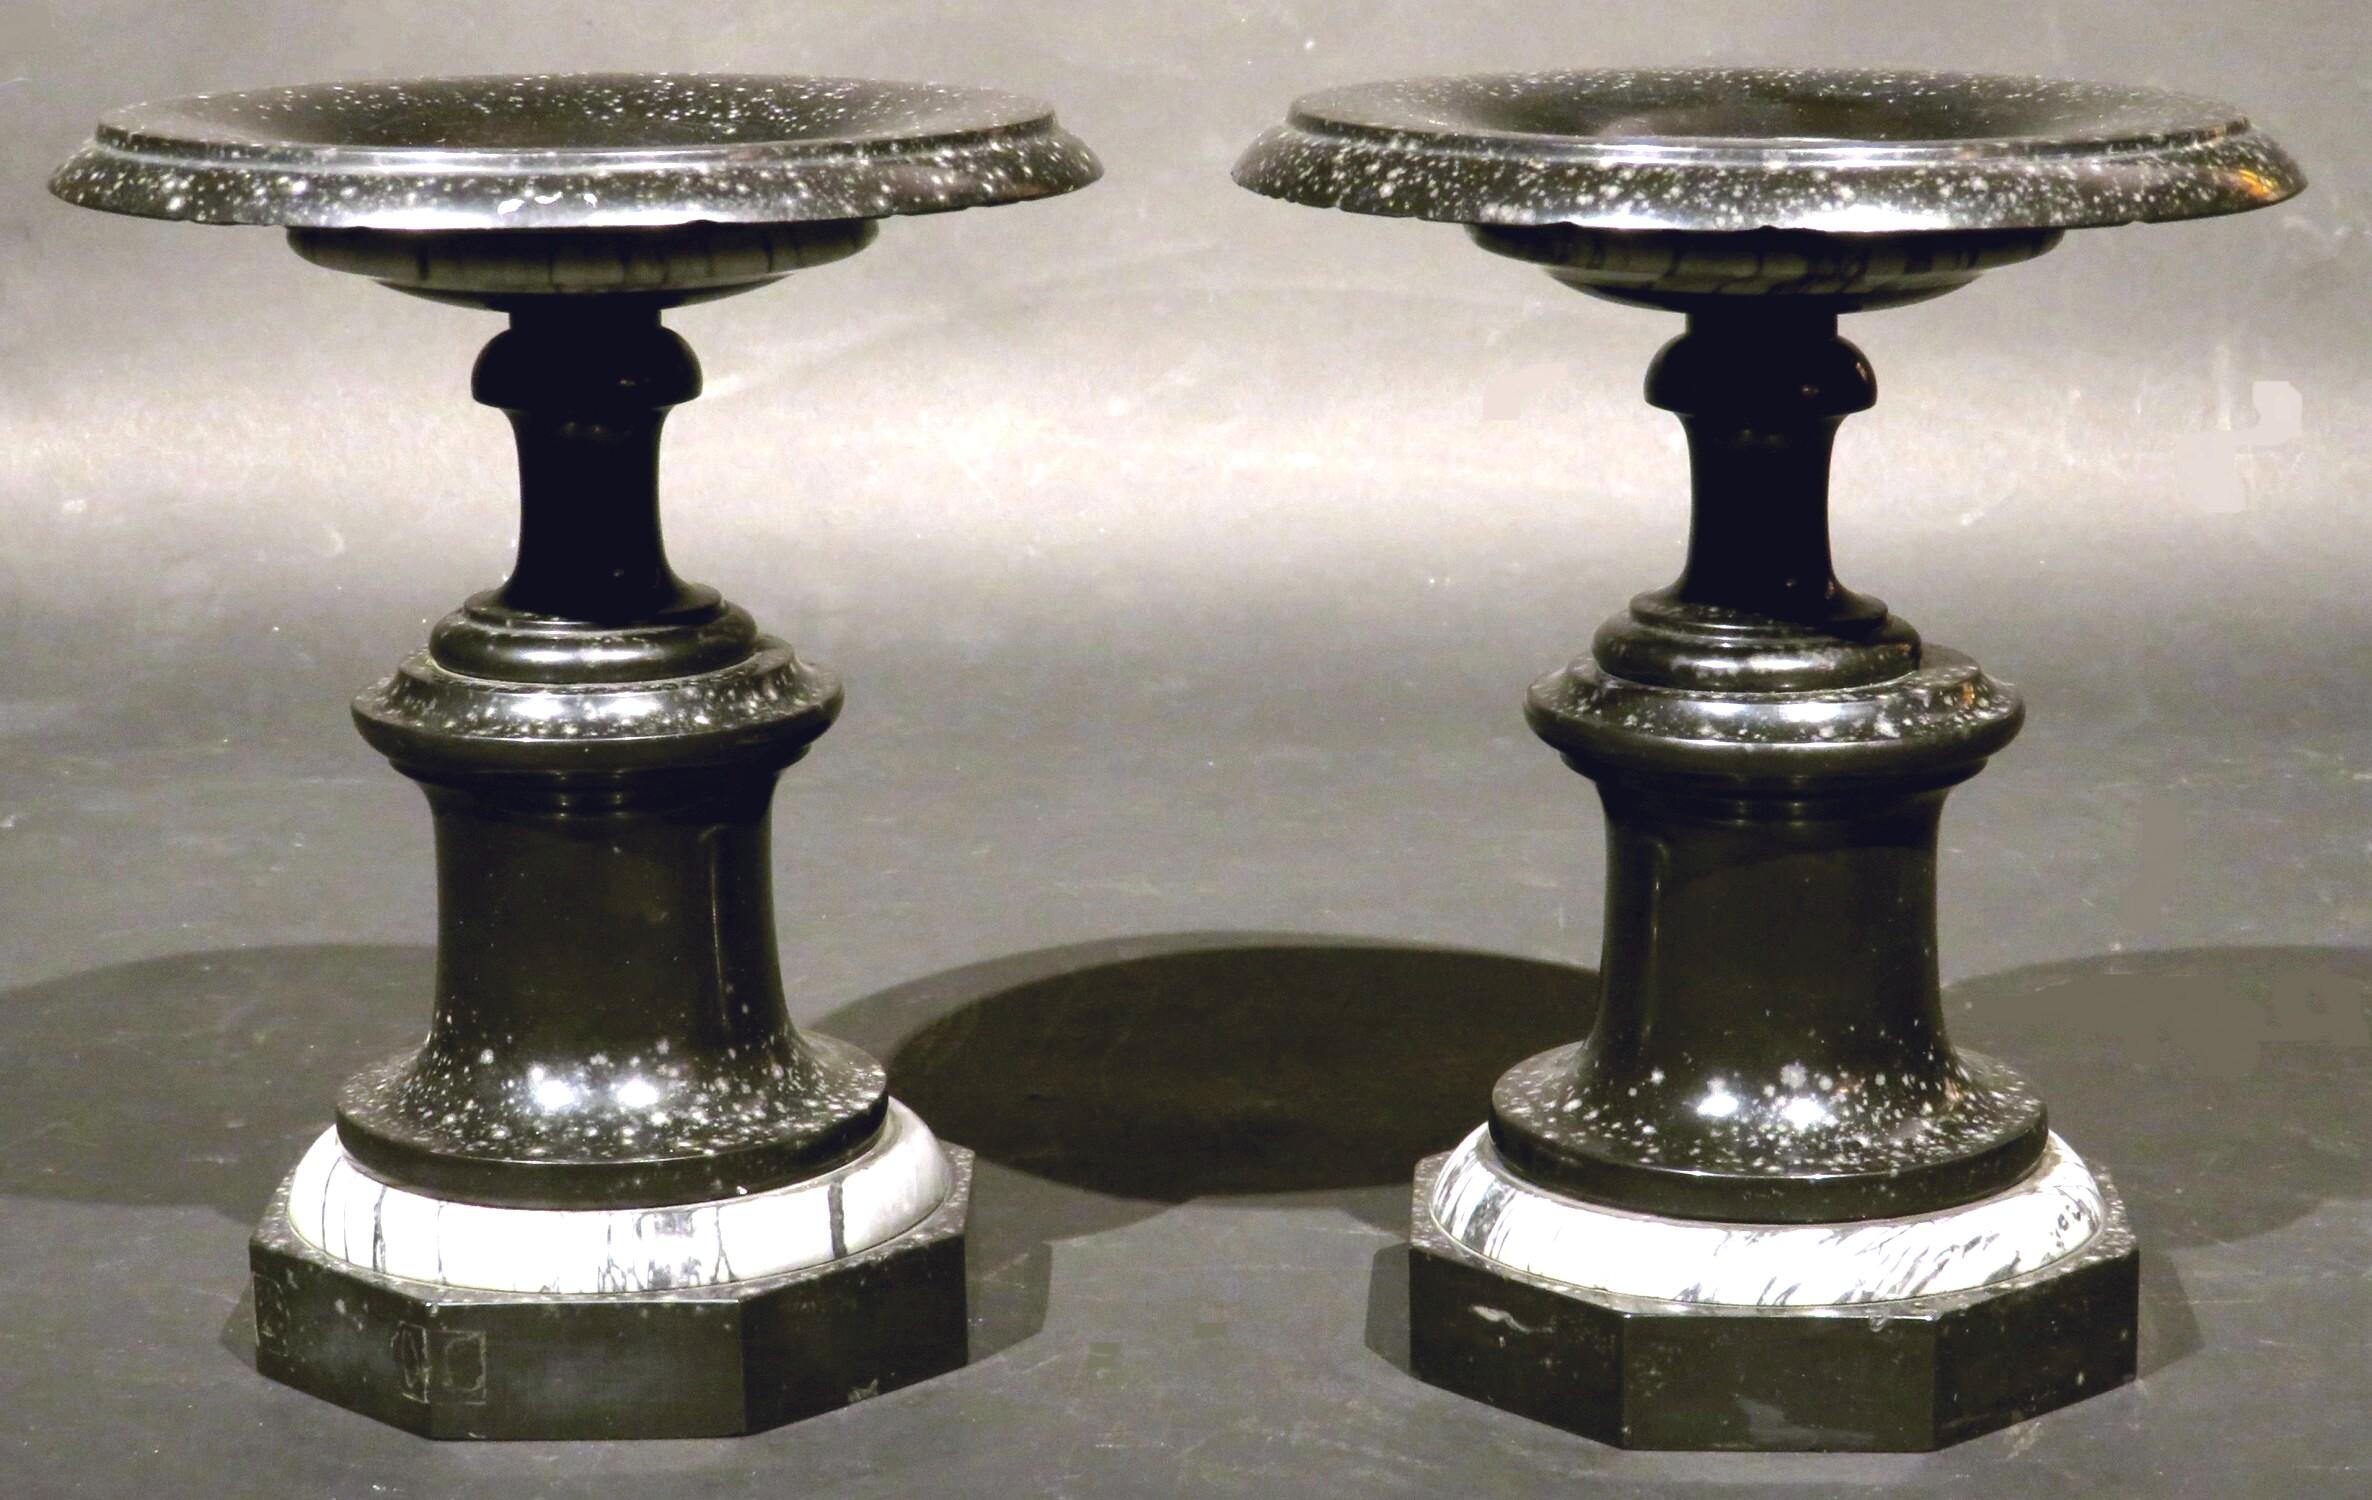 Turned Very Good Pair of Art Deco Fossilized Black Marble Tazzas, France Circa 1900